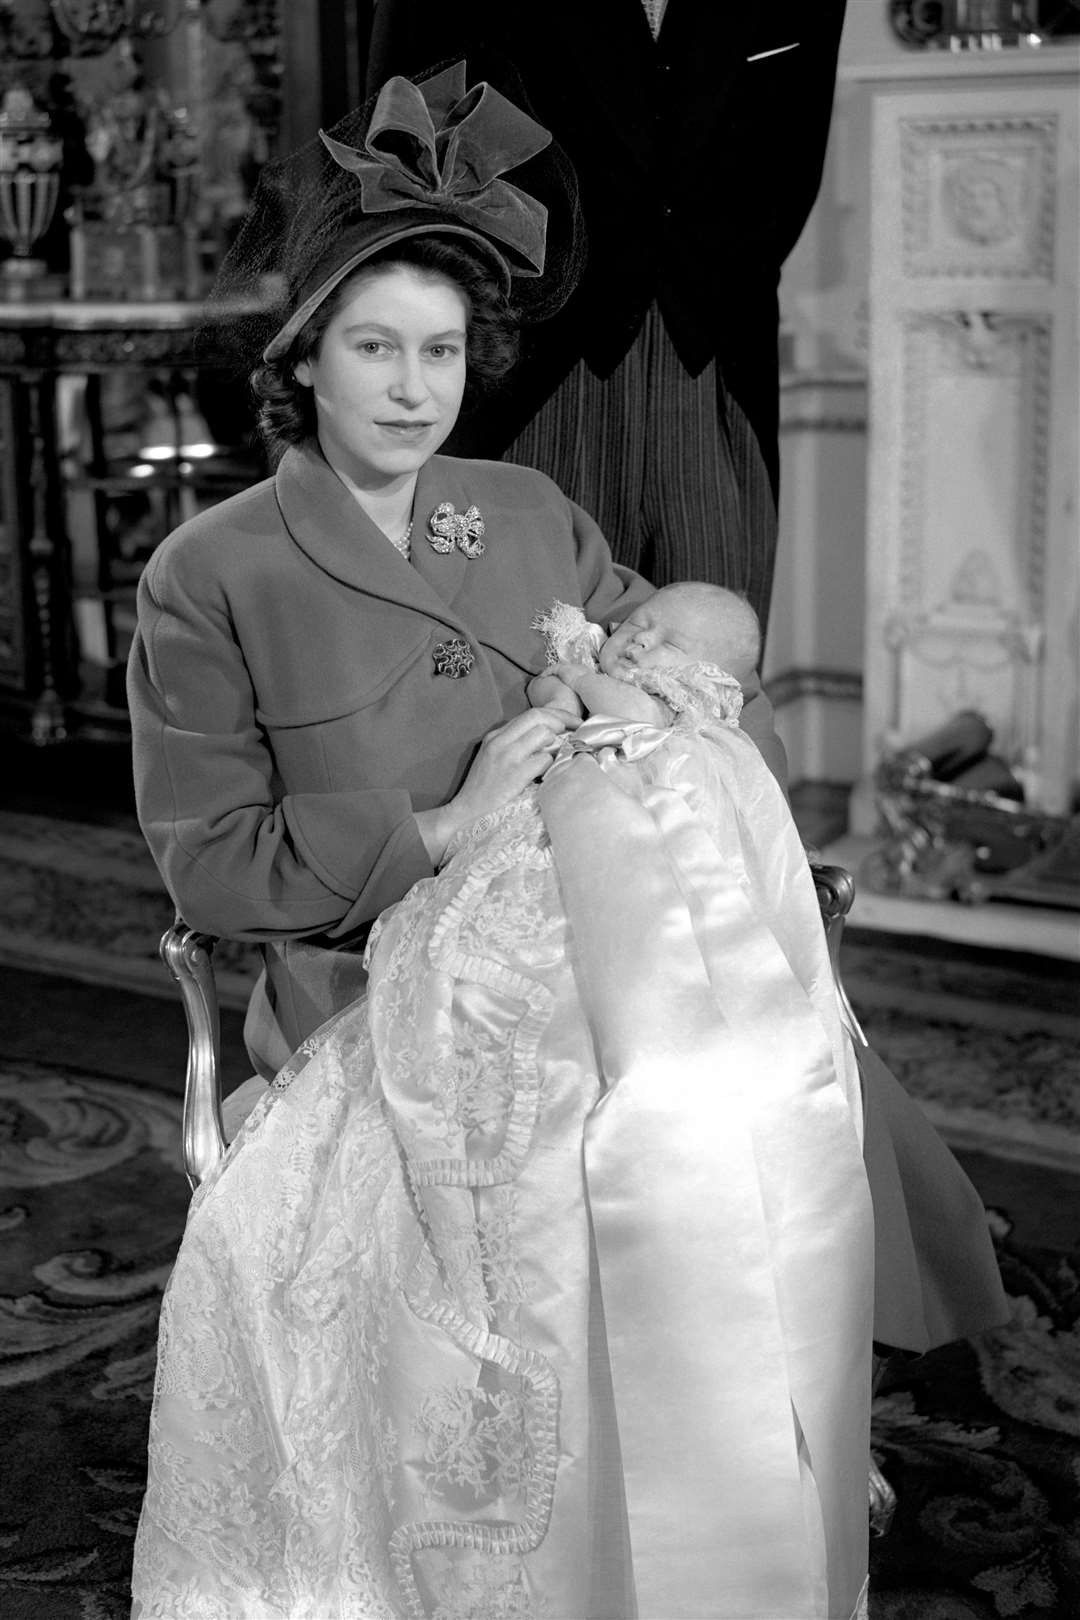 Princess Elizabeth, later Queen Elizabeth II, holding her baby son Prince Charles at his christening in 1948 (PA)